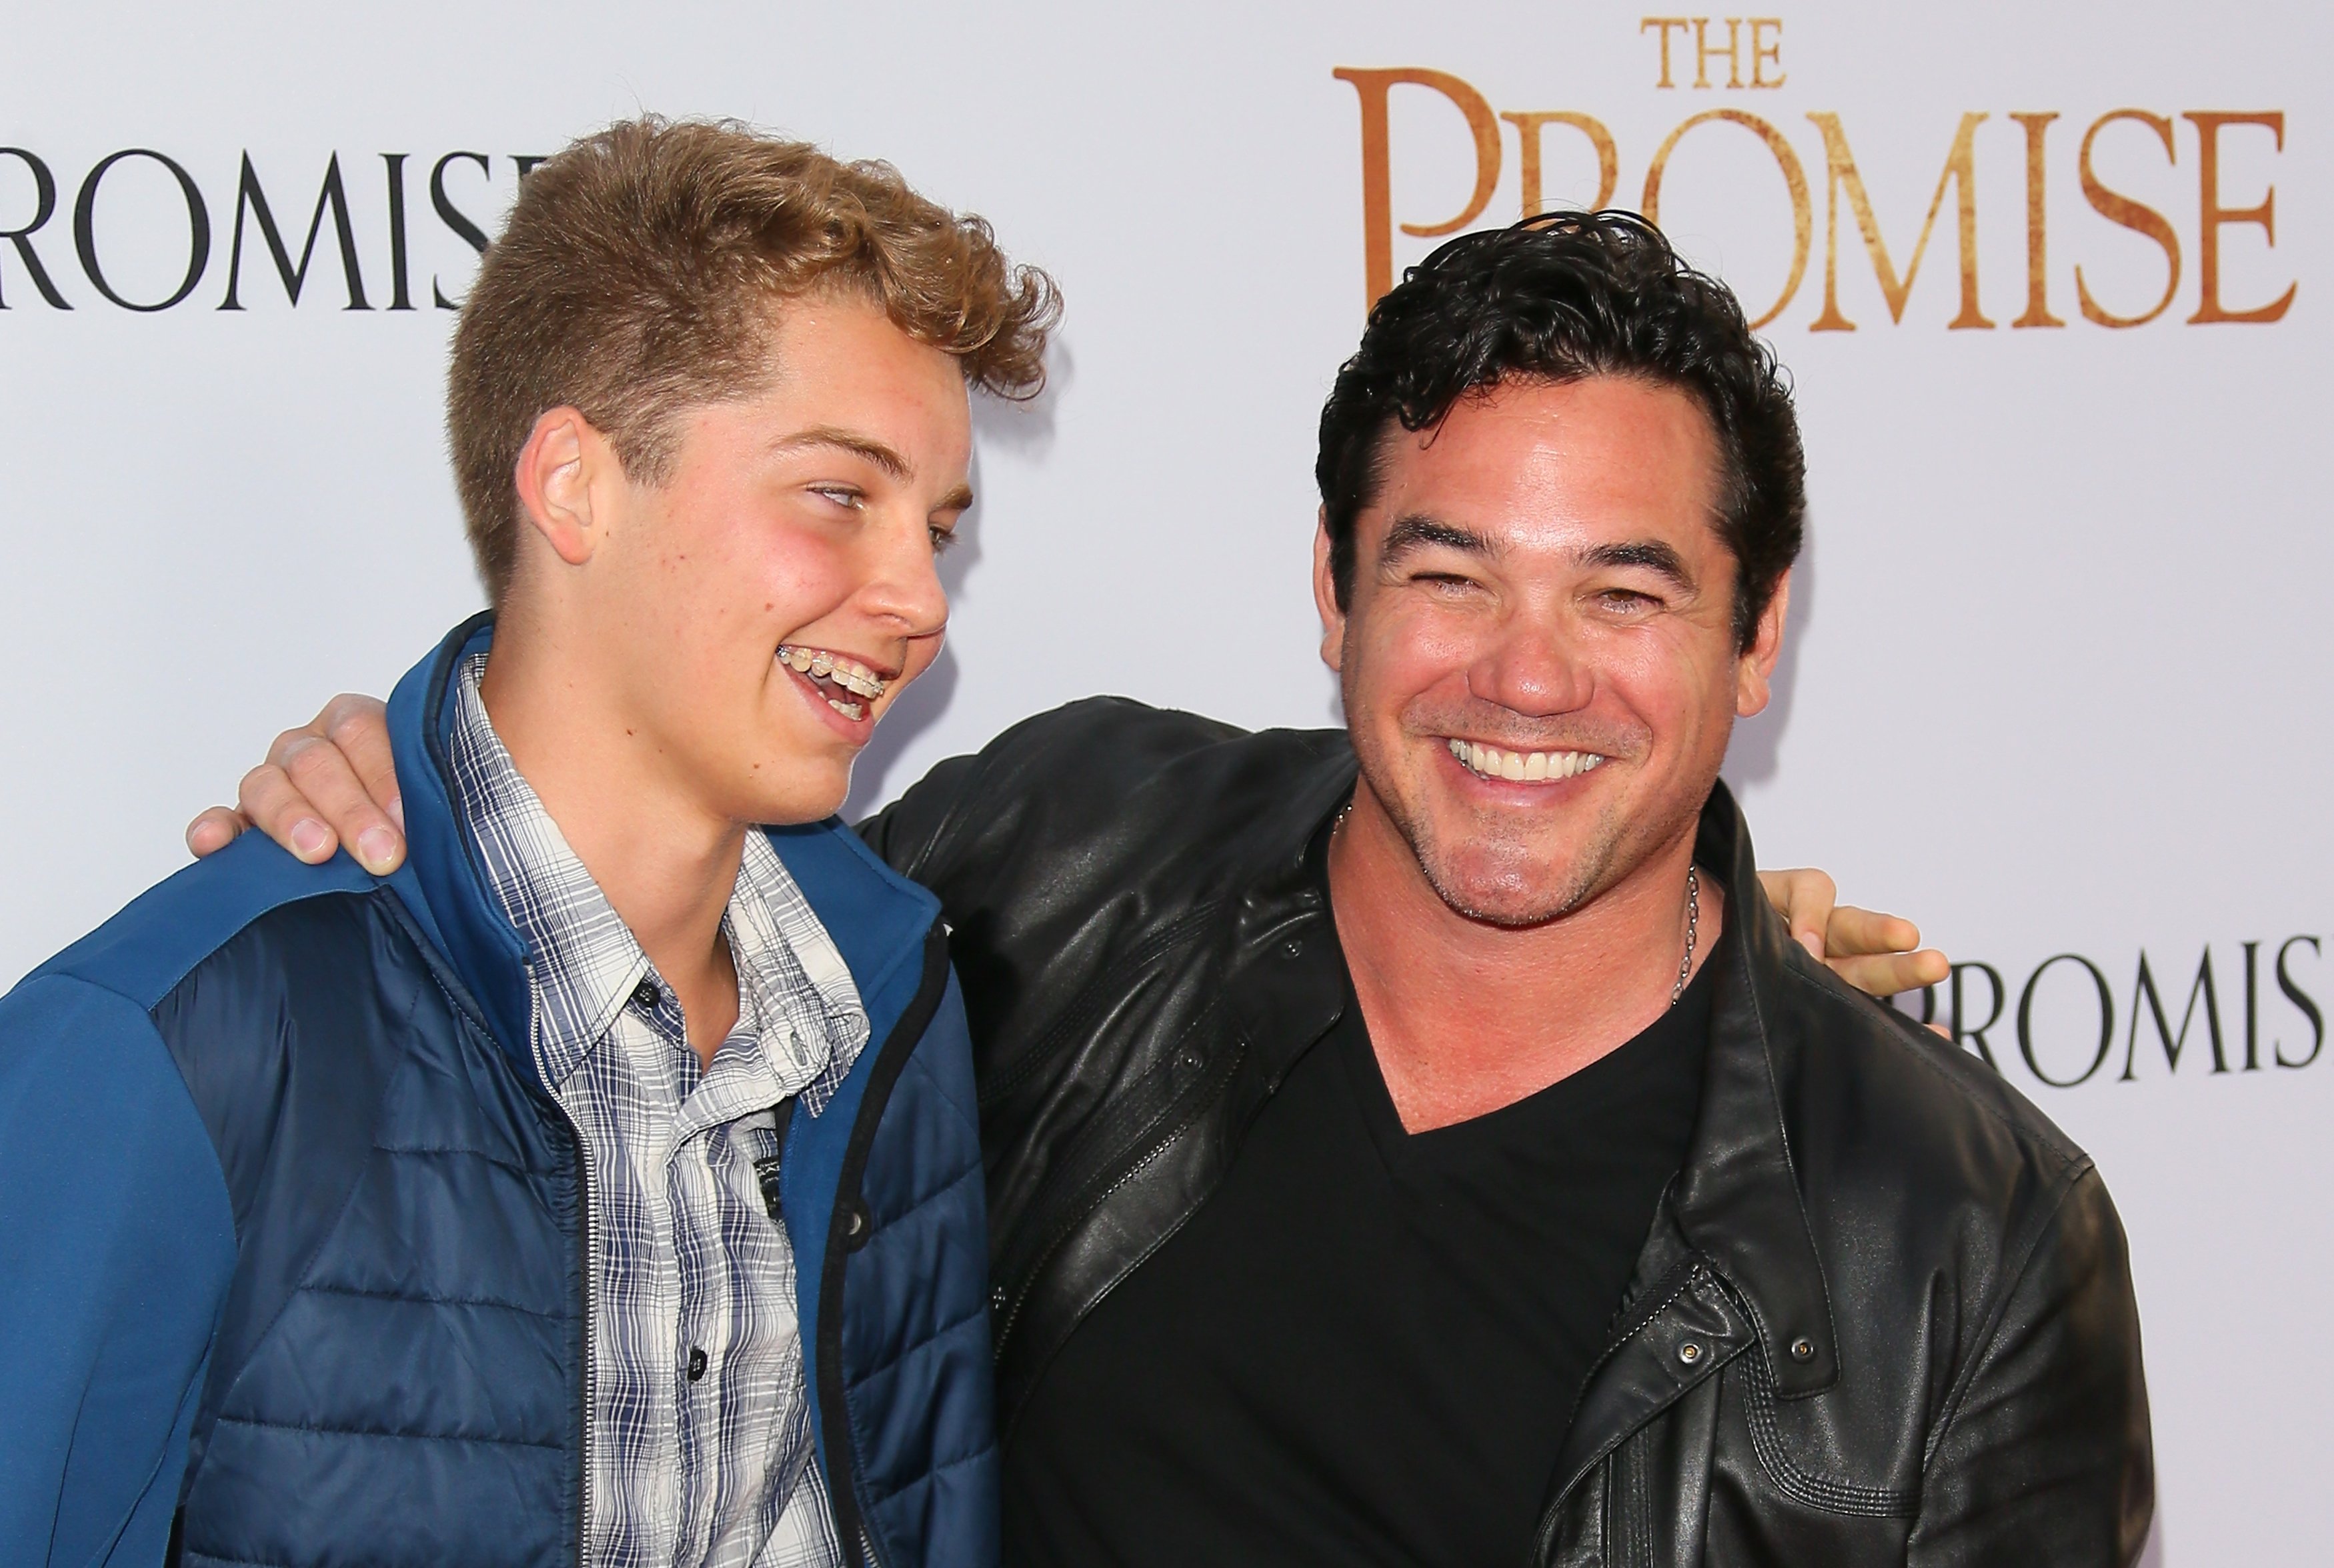 Christopher Dean Cain and Dean Cain attend the premiere of Open Road Films' 'The Promise' on April 12, 2017 in Hollywood, California. | Source: Getty Images